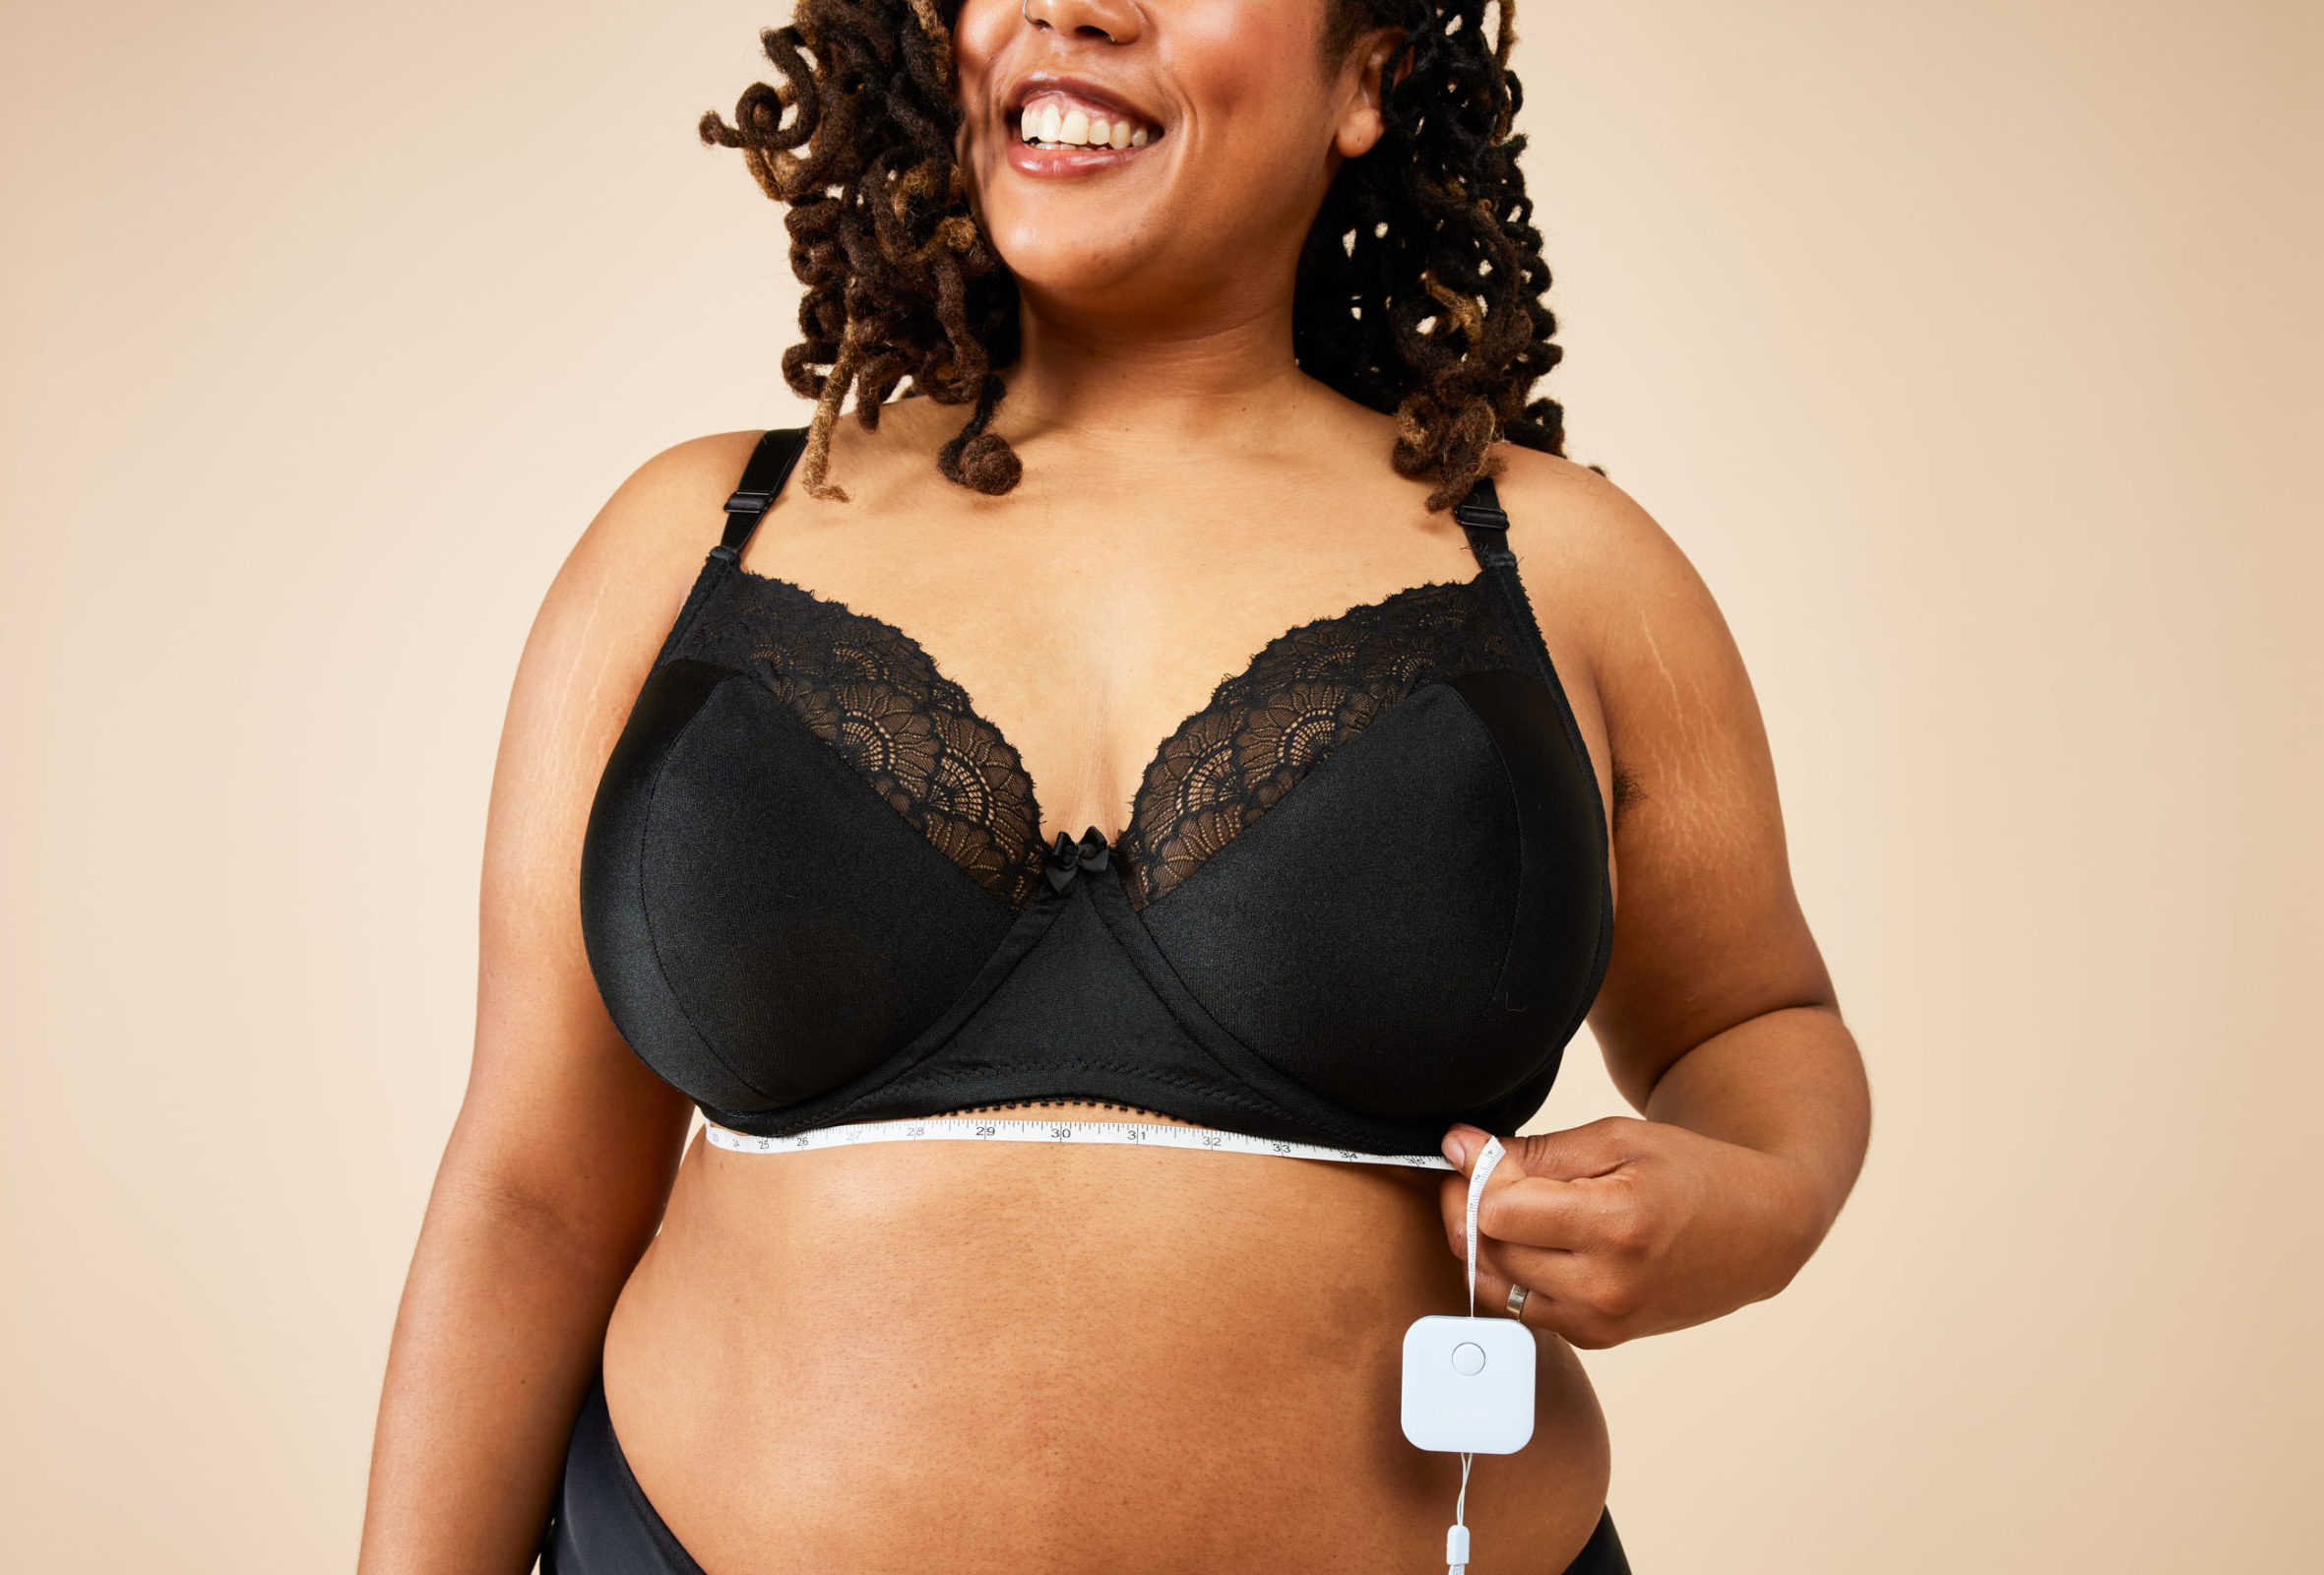 How To Measure Your Bra Size - Chatelaine